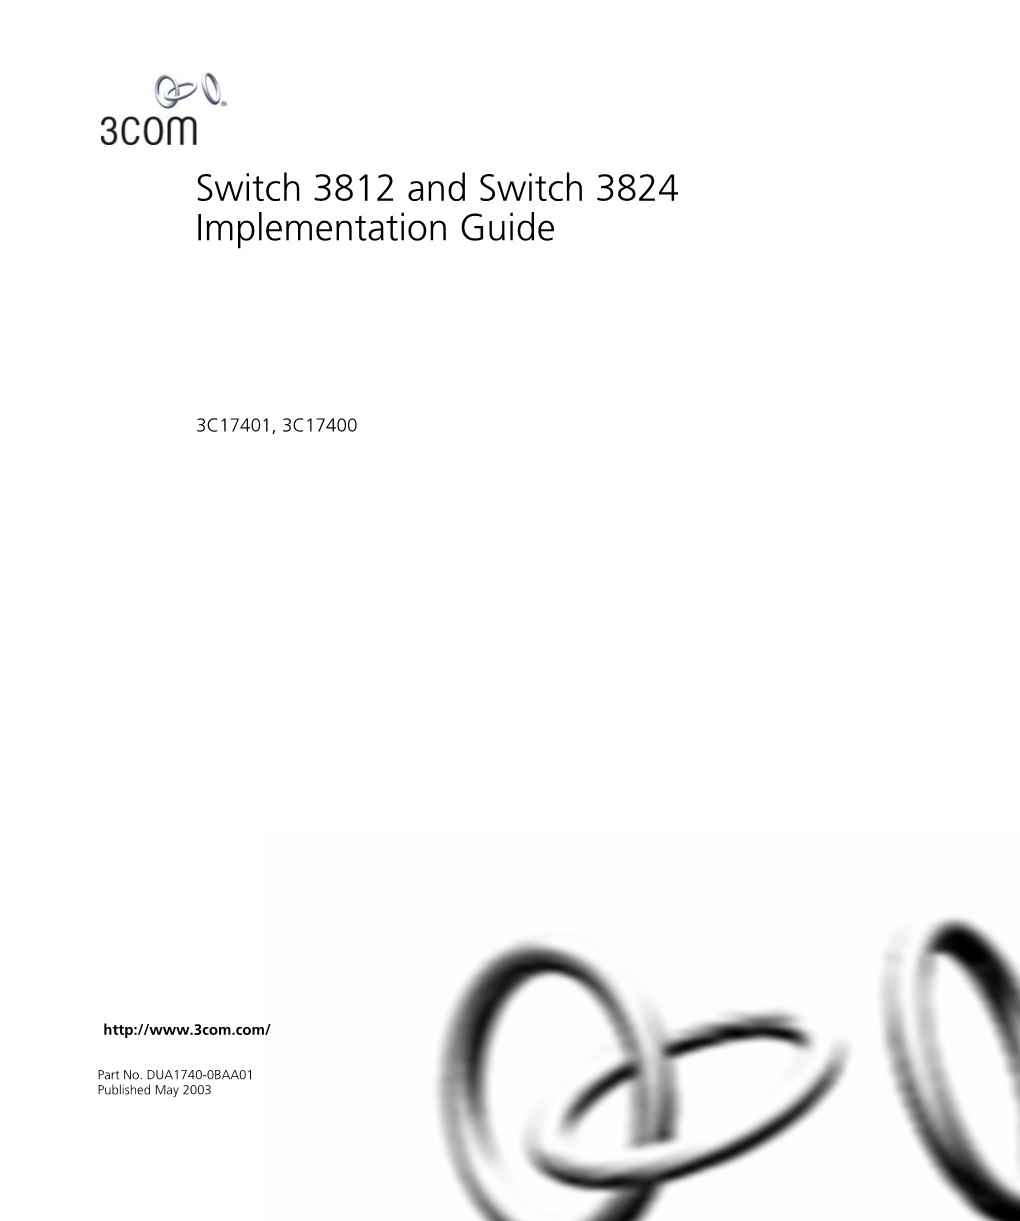 Switch 3812 and Switch 3824 Implementation Guide